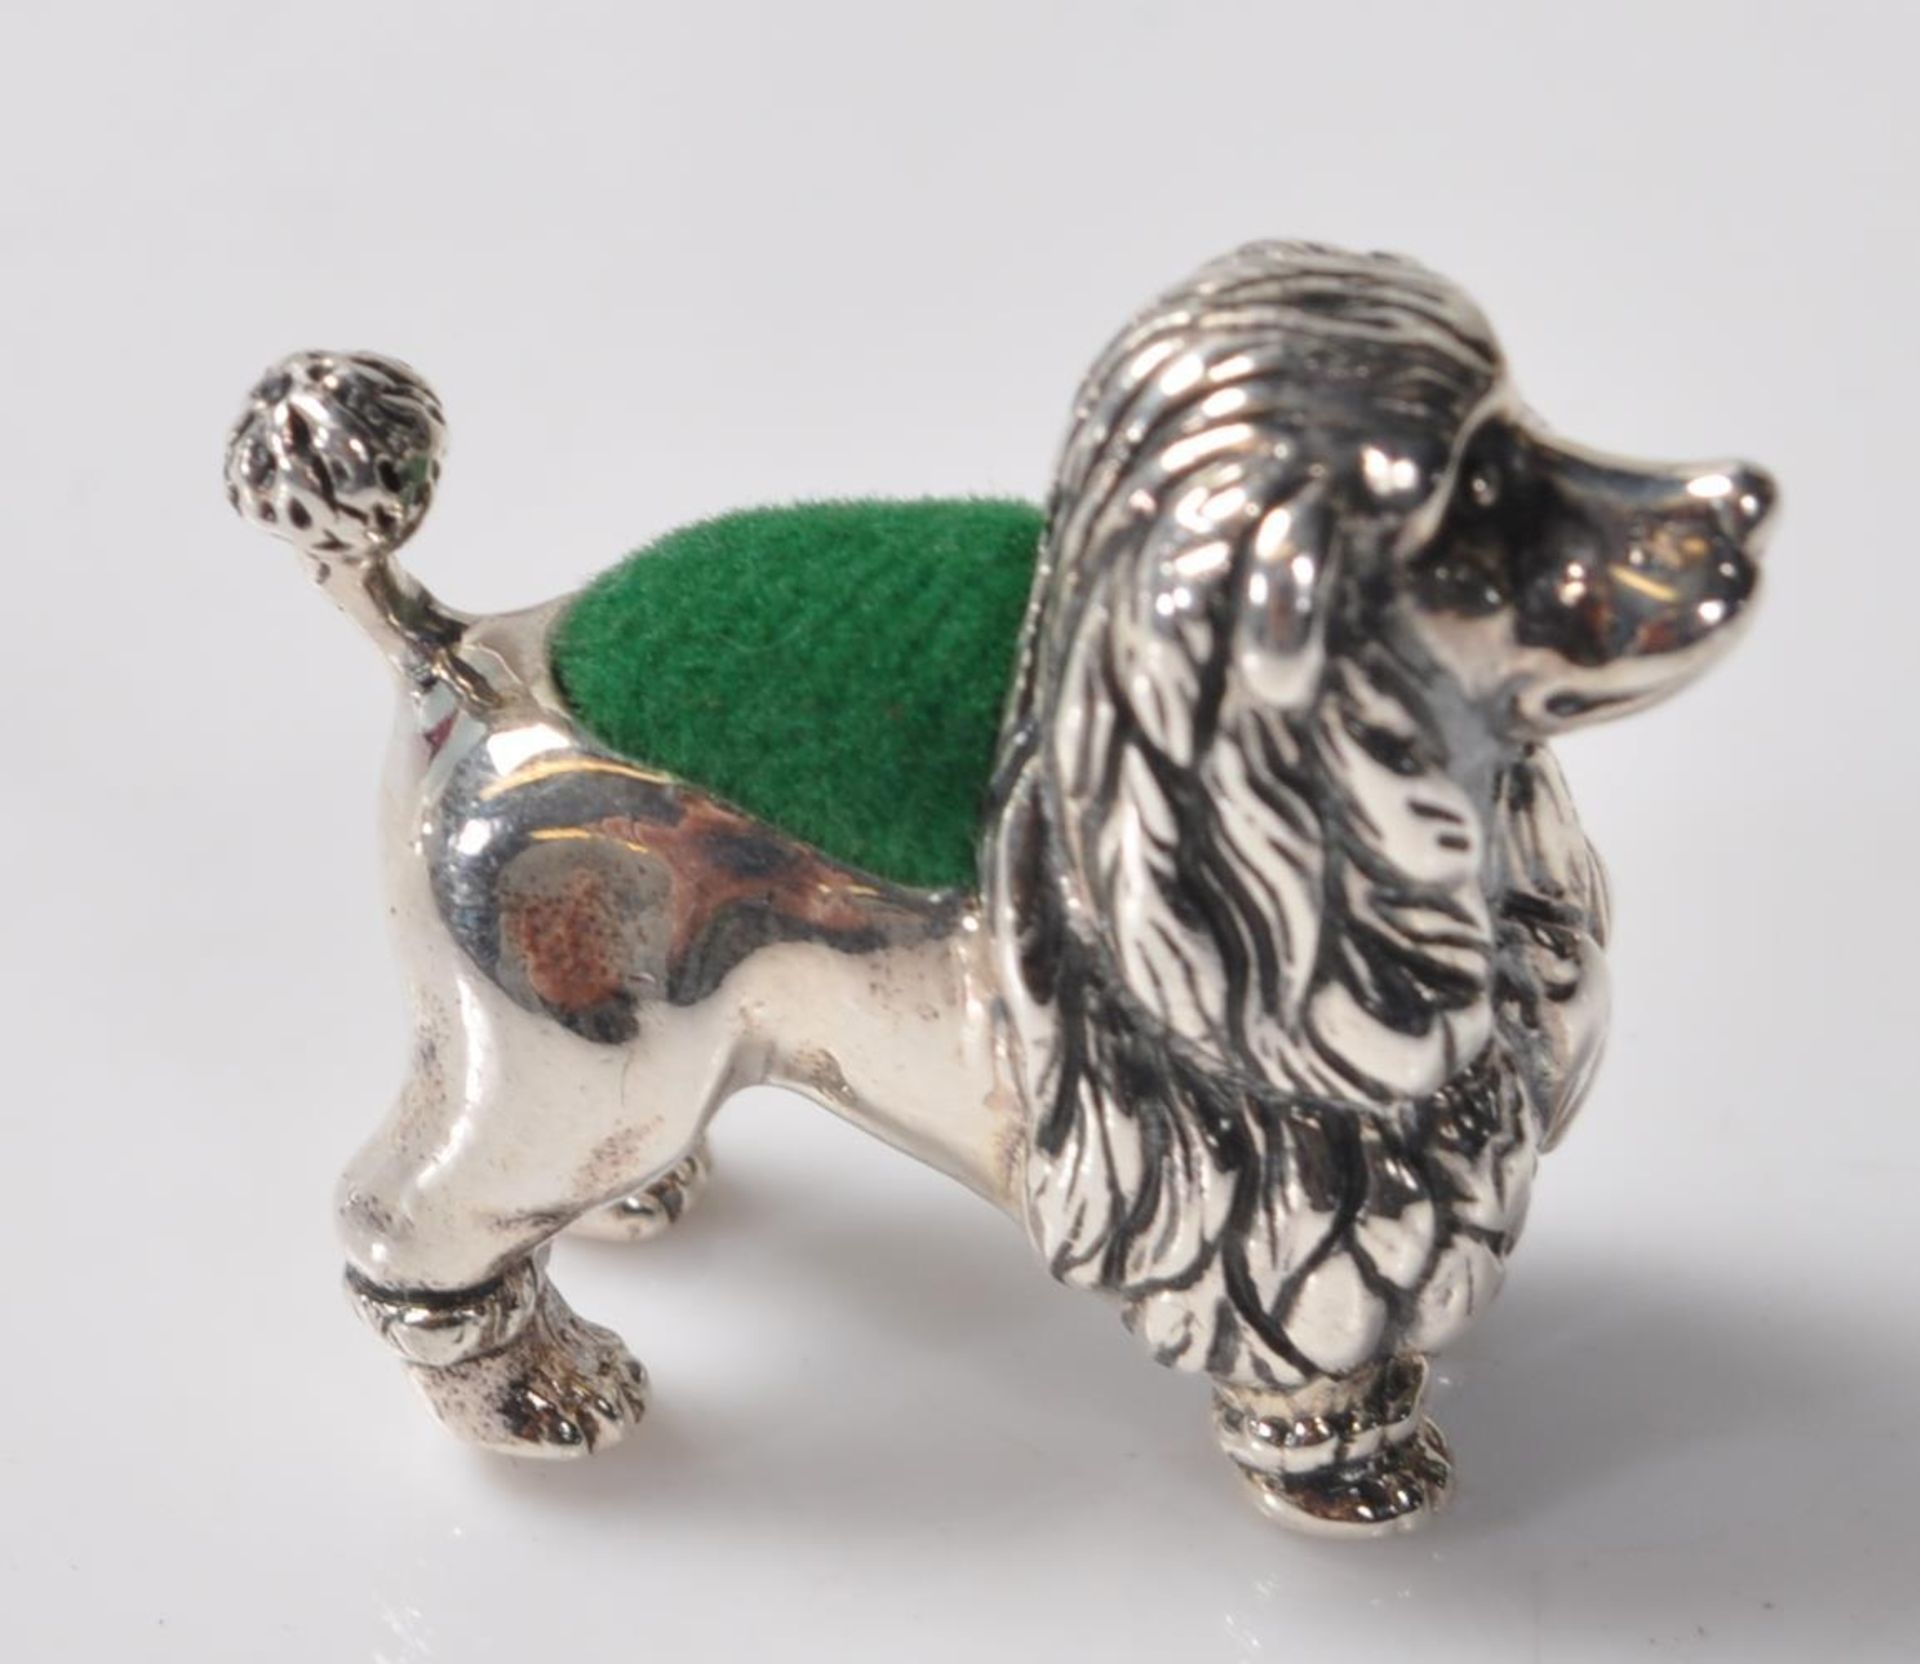 STAMPED 925 SILVER PIN CUSHION IN THE FORM OF A POODLE. - Image 4 of 5